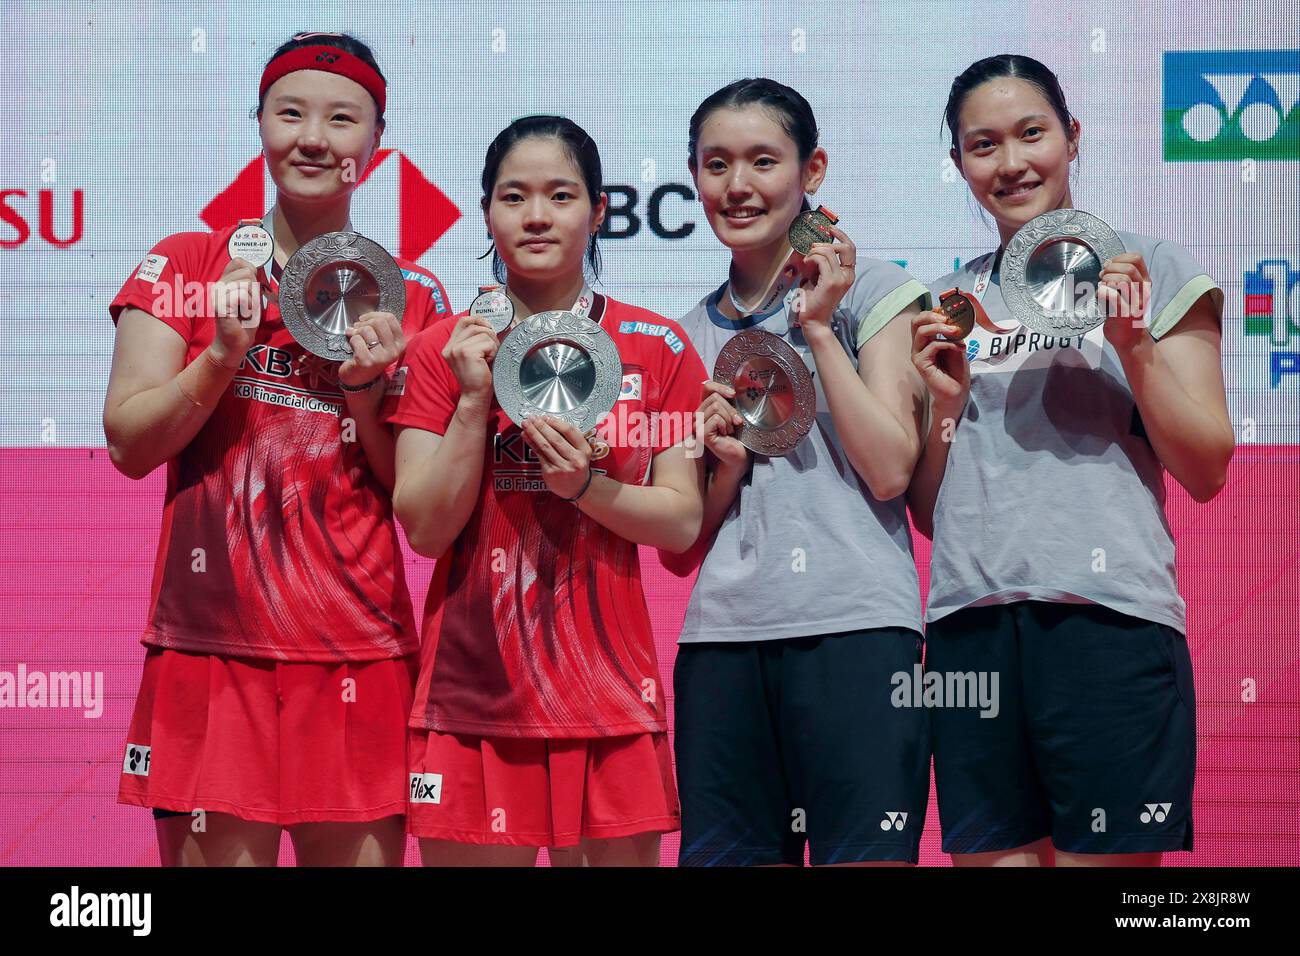 Kuala Lumpur, Malaysia. 26th May, 2024. (L-R) Shin Seung Chan and Lee Yu Lim of Korea, Rin Iwanaga and Kie Nakanishi of Japan pose for photos with their medals at the victory ceremony after the Women's Doubles Final match of the Perodua Malaysia Masters 2024 at Axiata Arena. Rin Iwanaga and Kie Nakanishi won with scores; 17/21/21 : 21/19/18. (Photo by Wong Fok Loy/SOPA Images/Sipa USA) Credit: Sipa USA/Alamy Live News Stock Photo